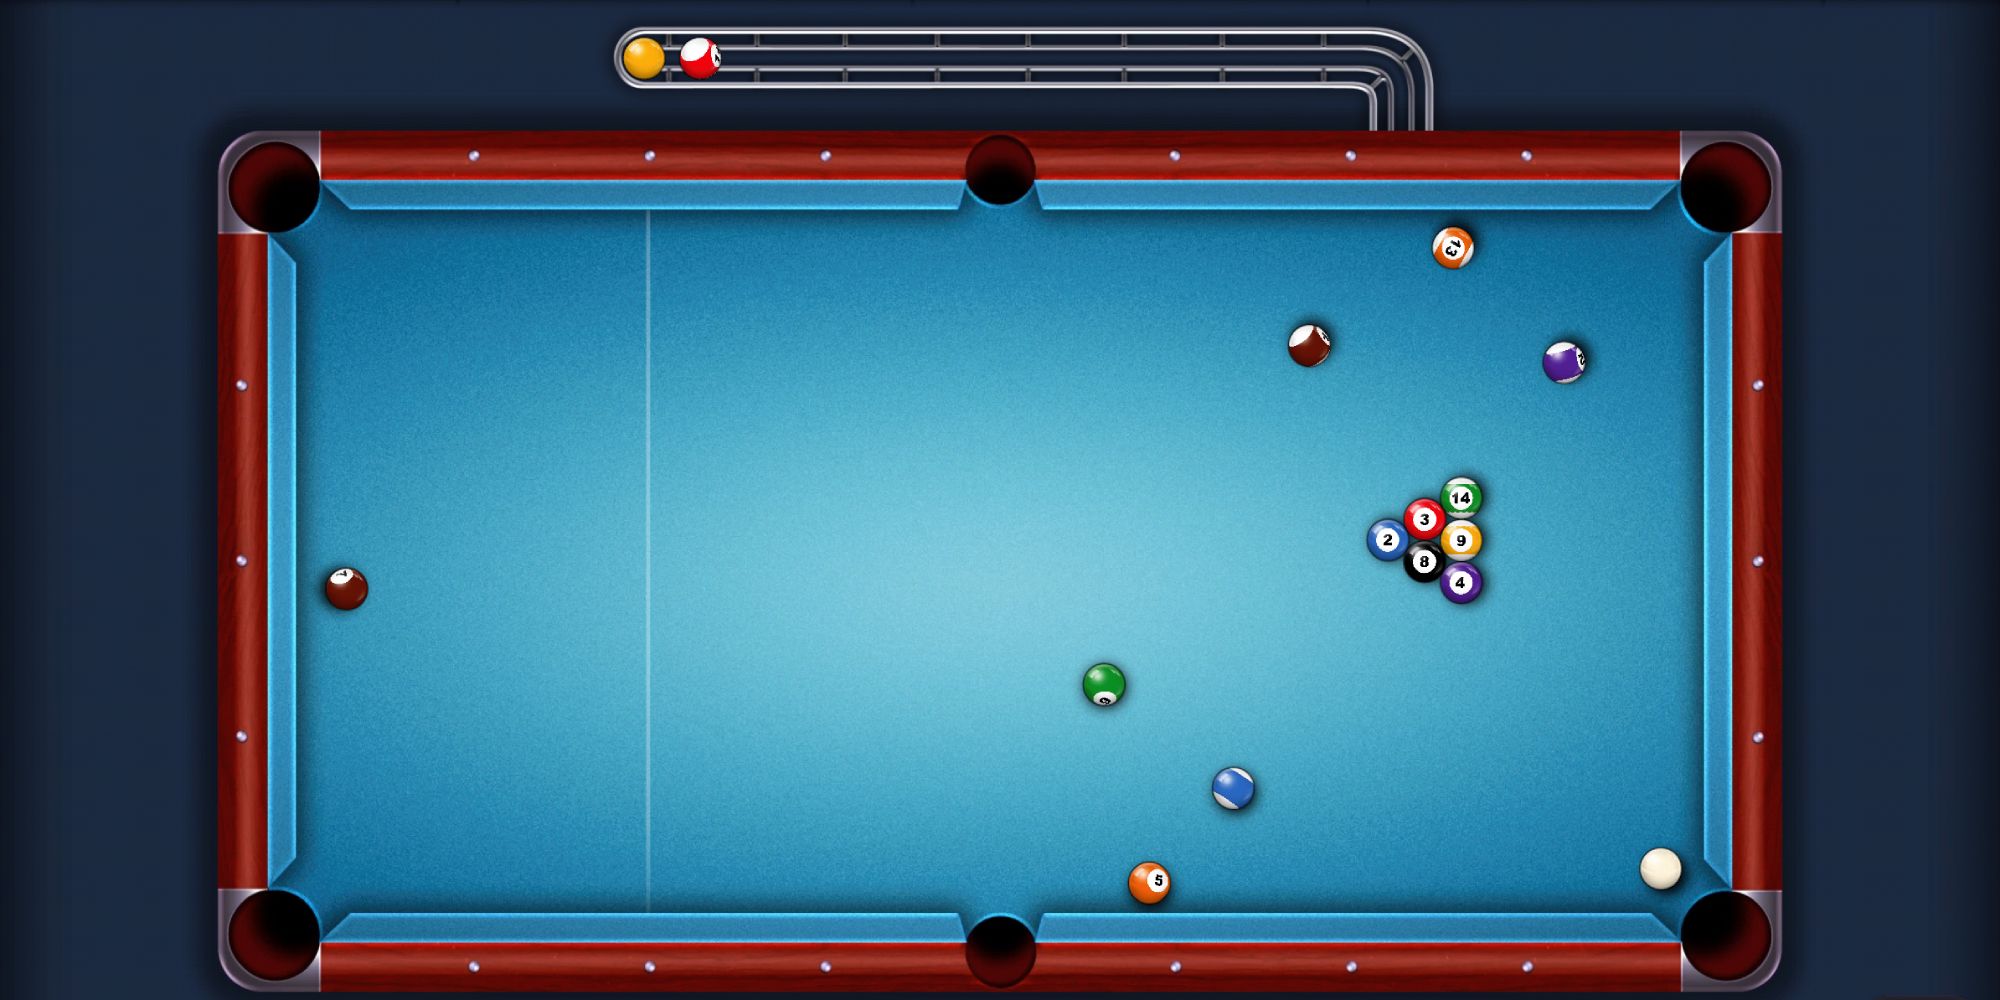 8 Ball Pool game with balls scattered all across the table 